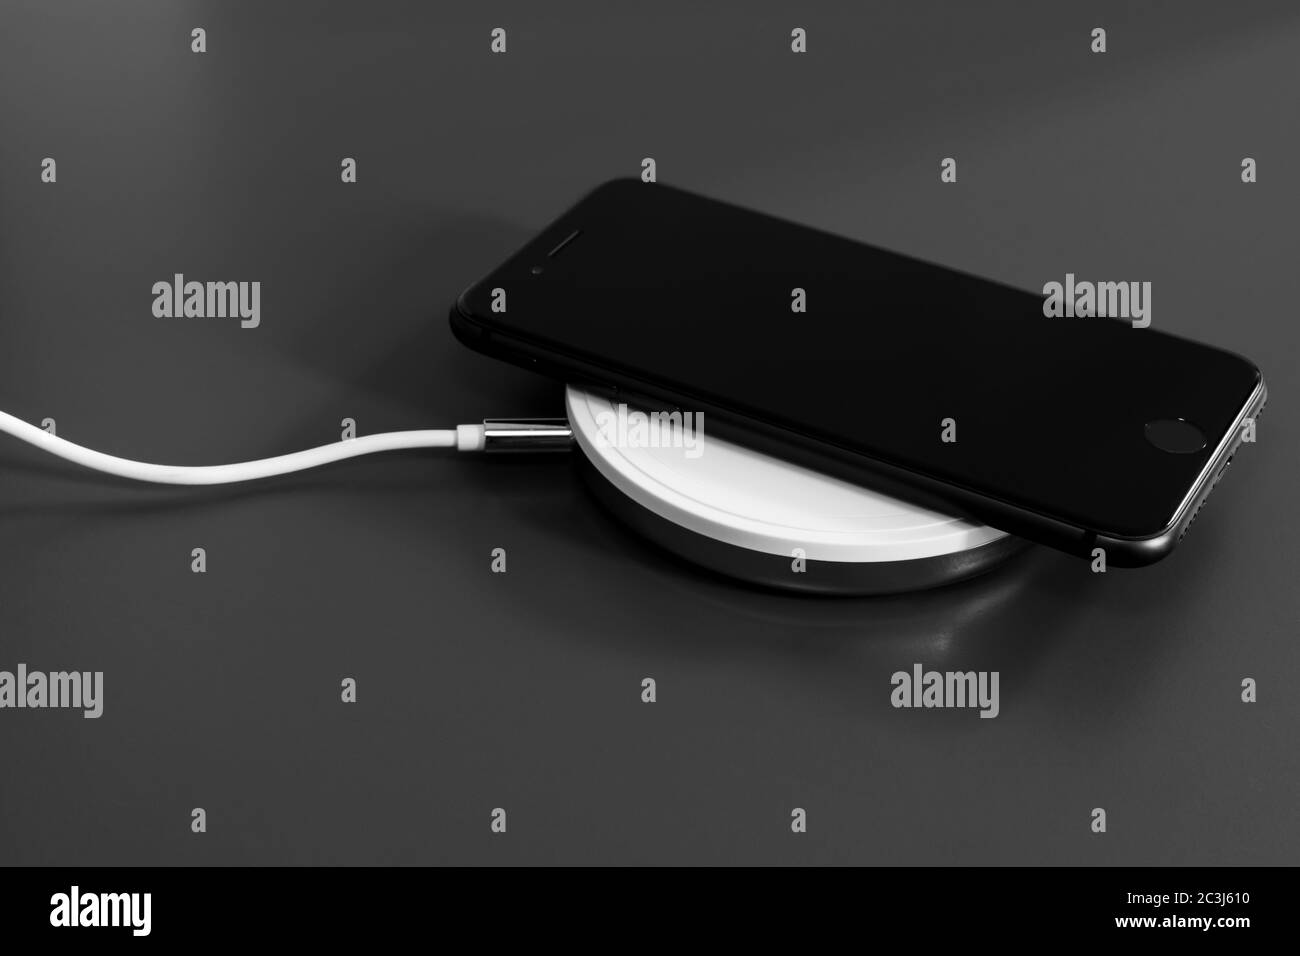 Close-up mobile phone charging on a wireless charging device Stock Photo